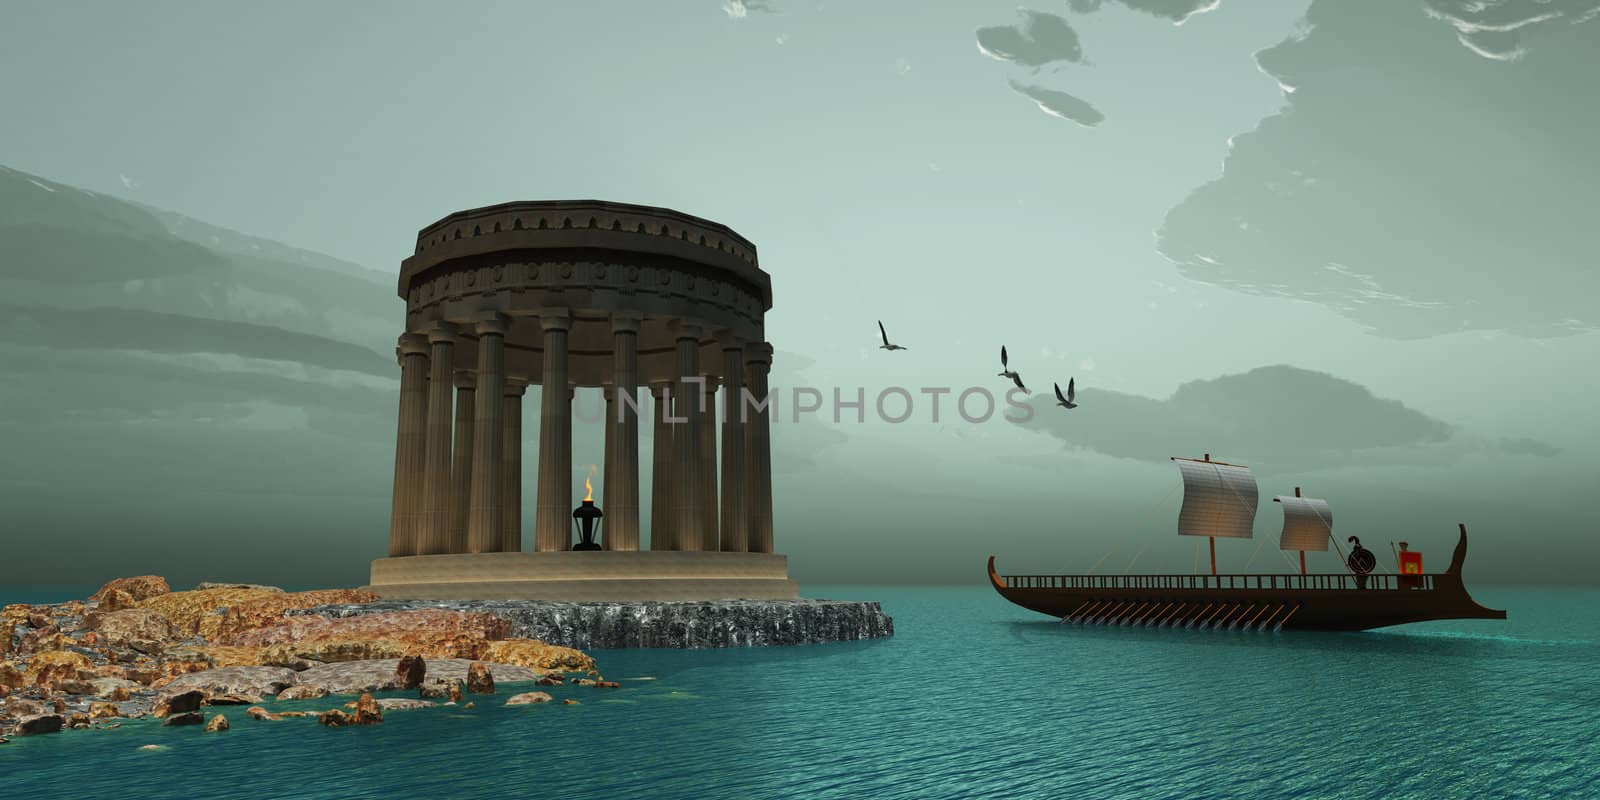 A ship passes close to a  beautiful Greek temple on the coast of this island.